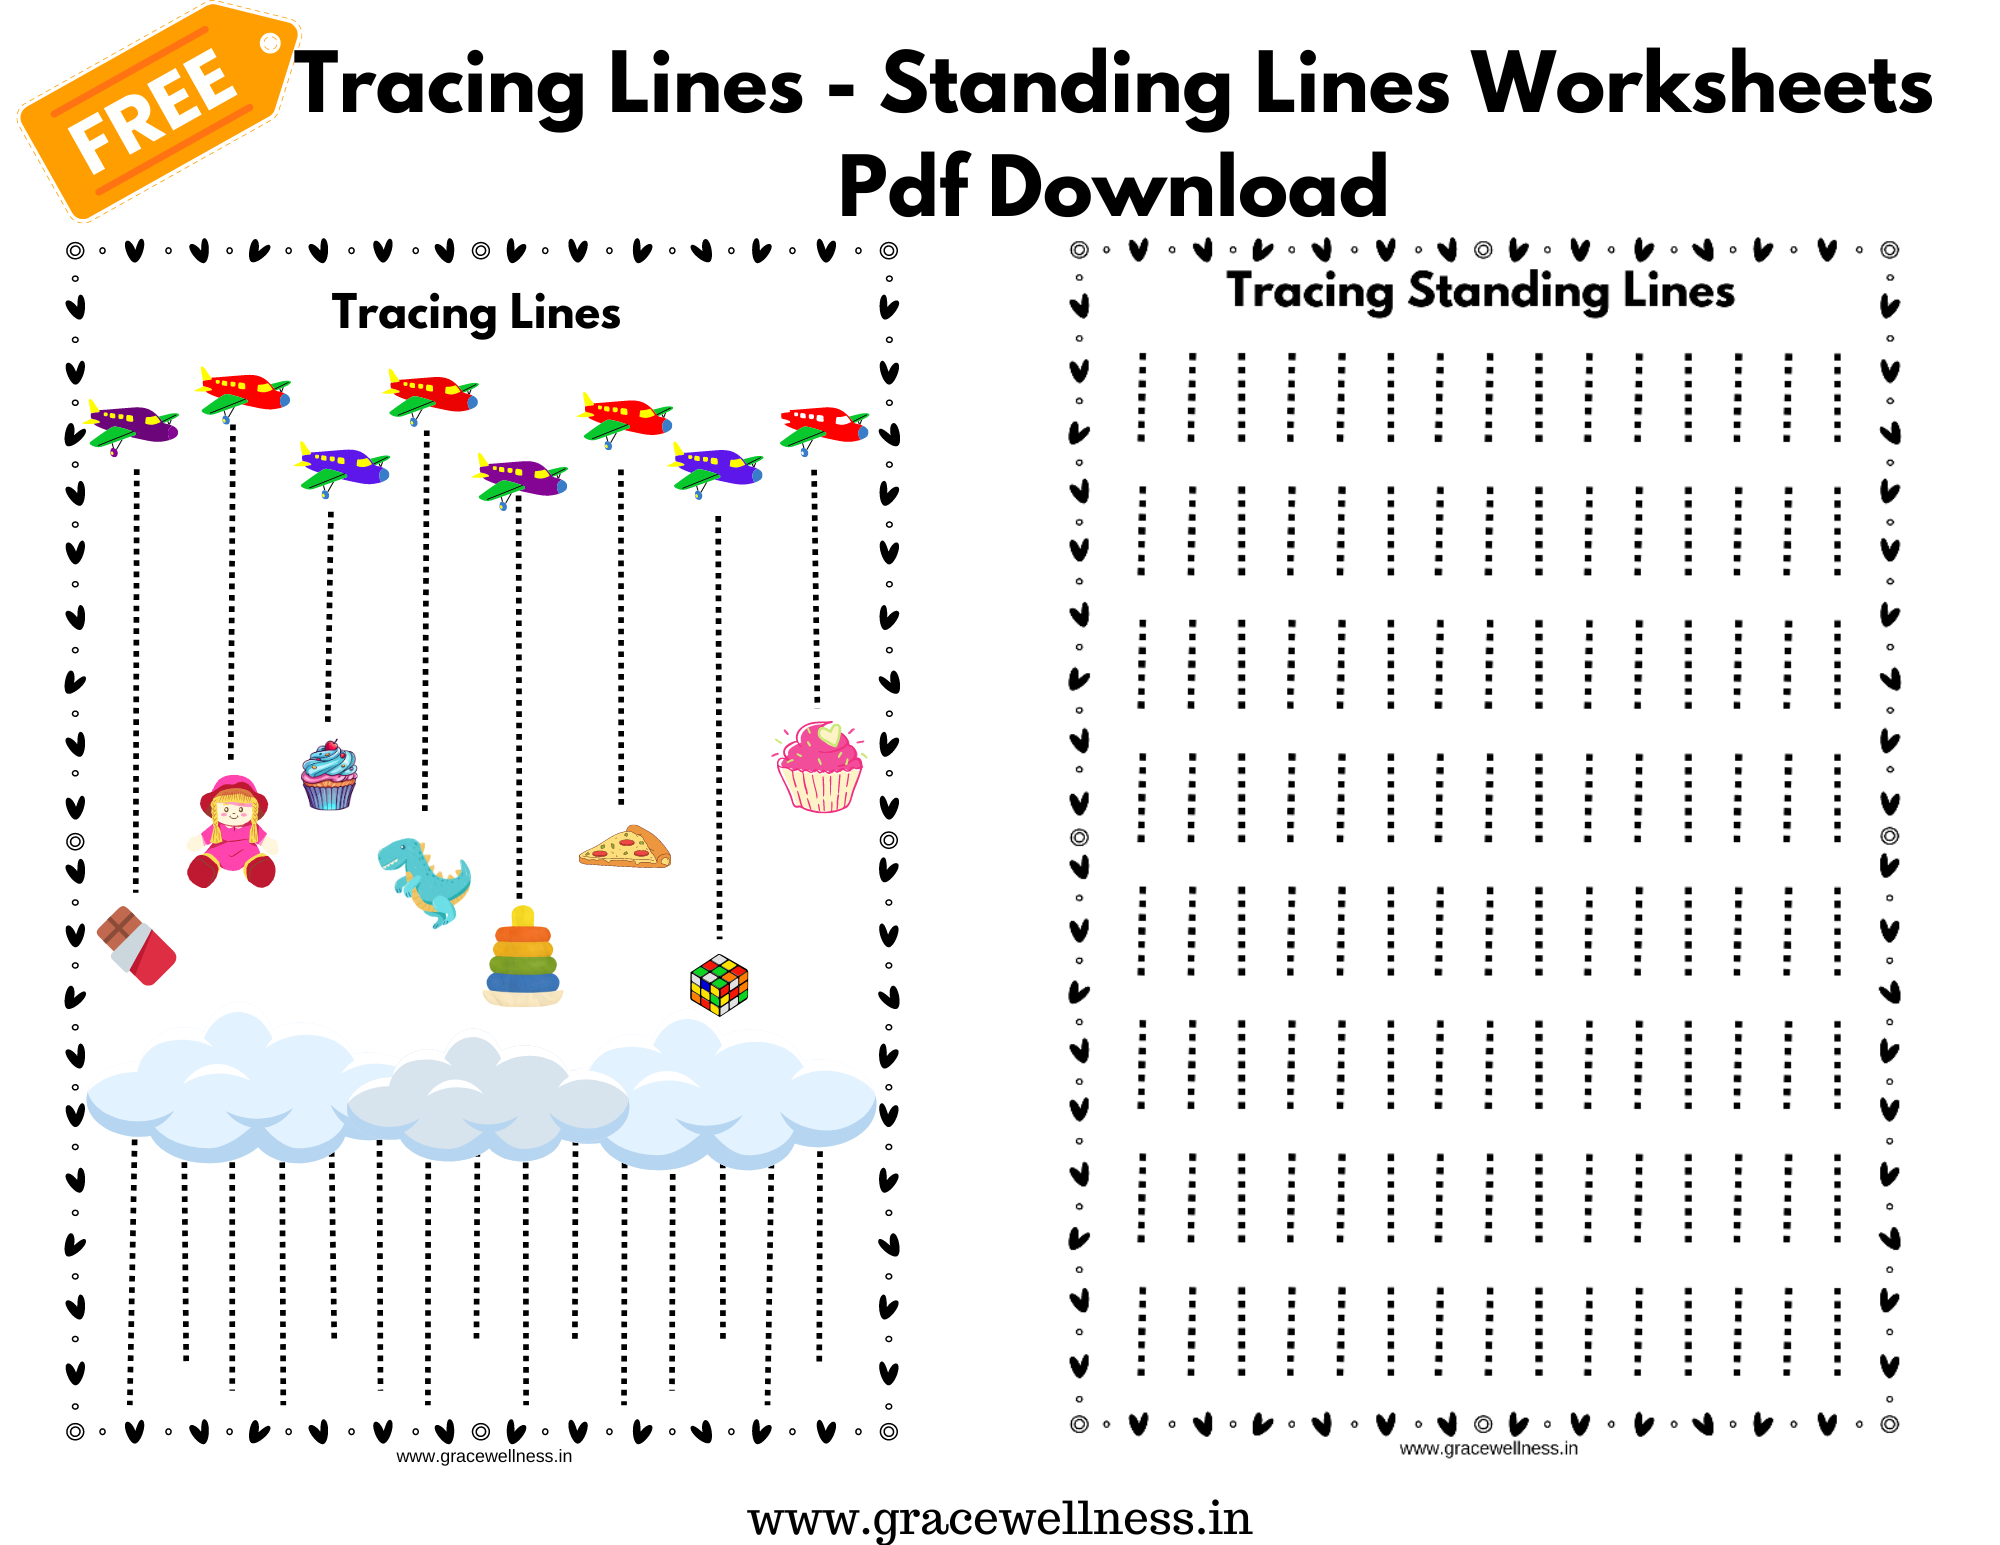 standing lines worksheets pdf download straight lines